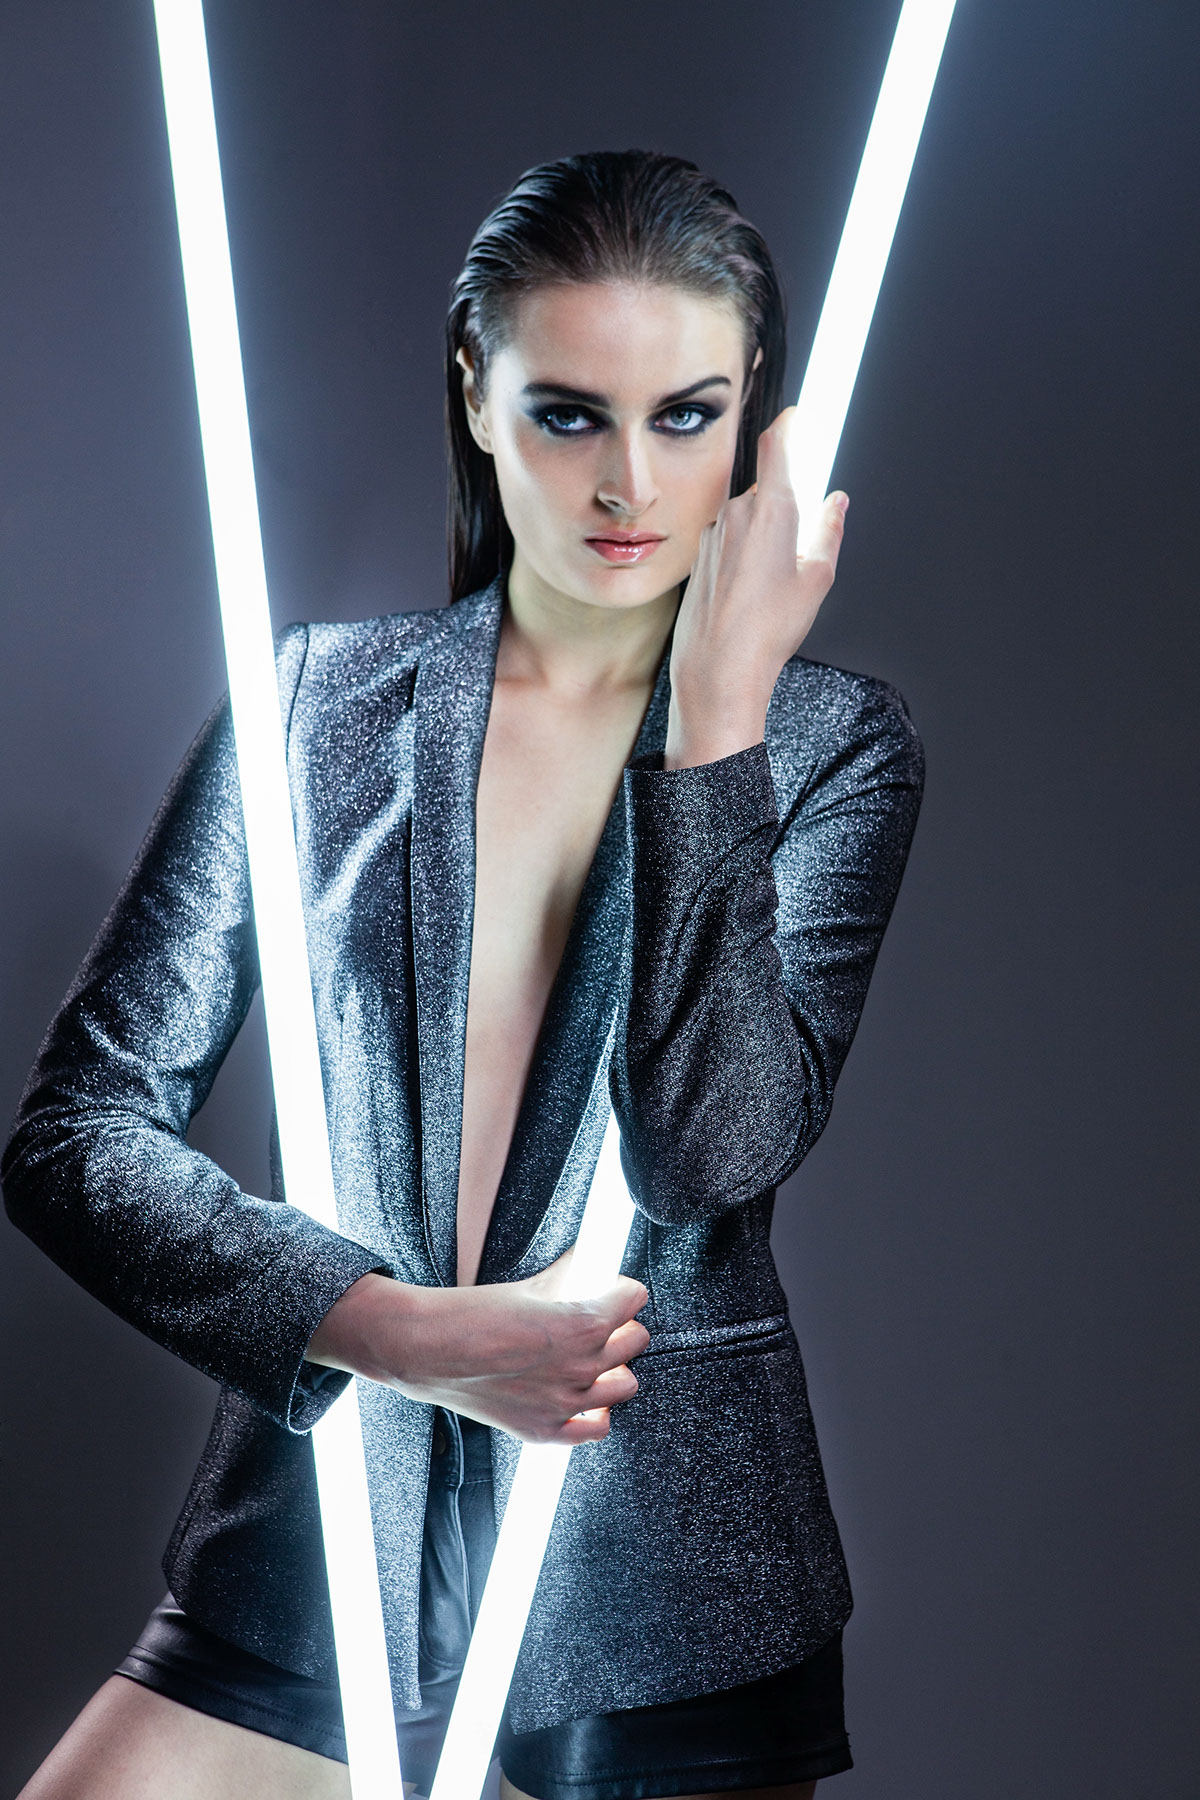 Ligths and fashion